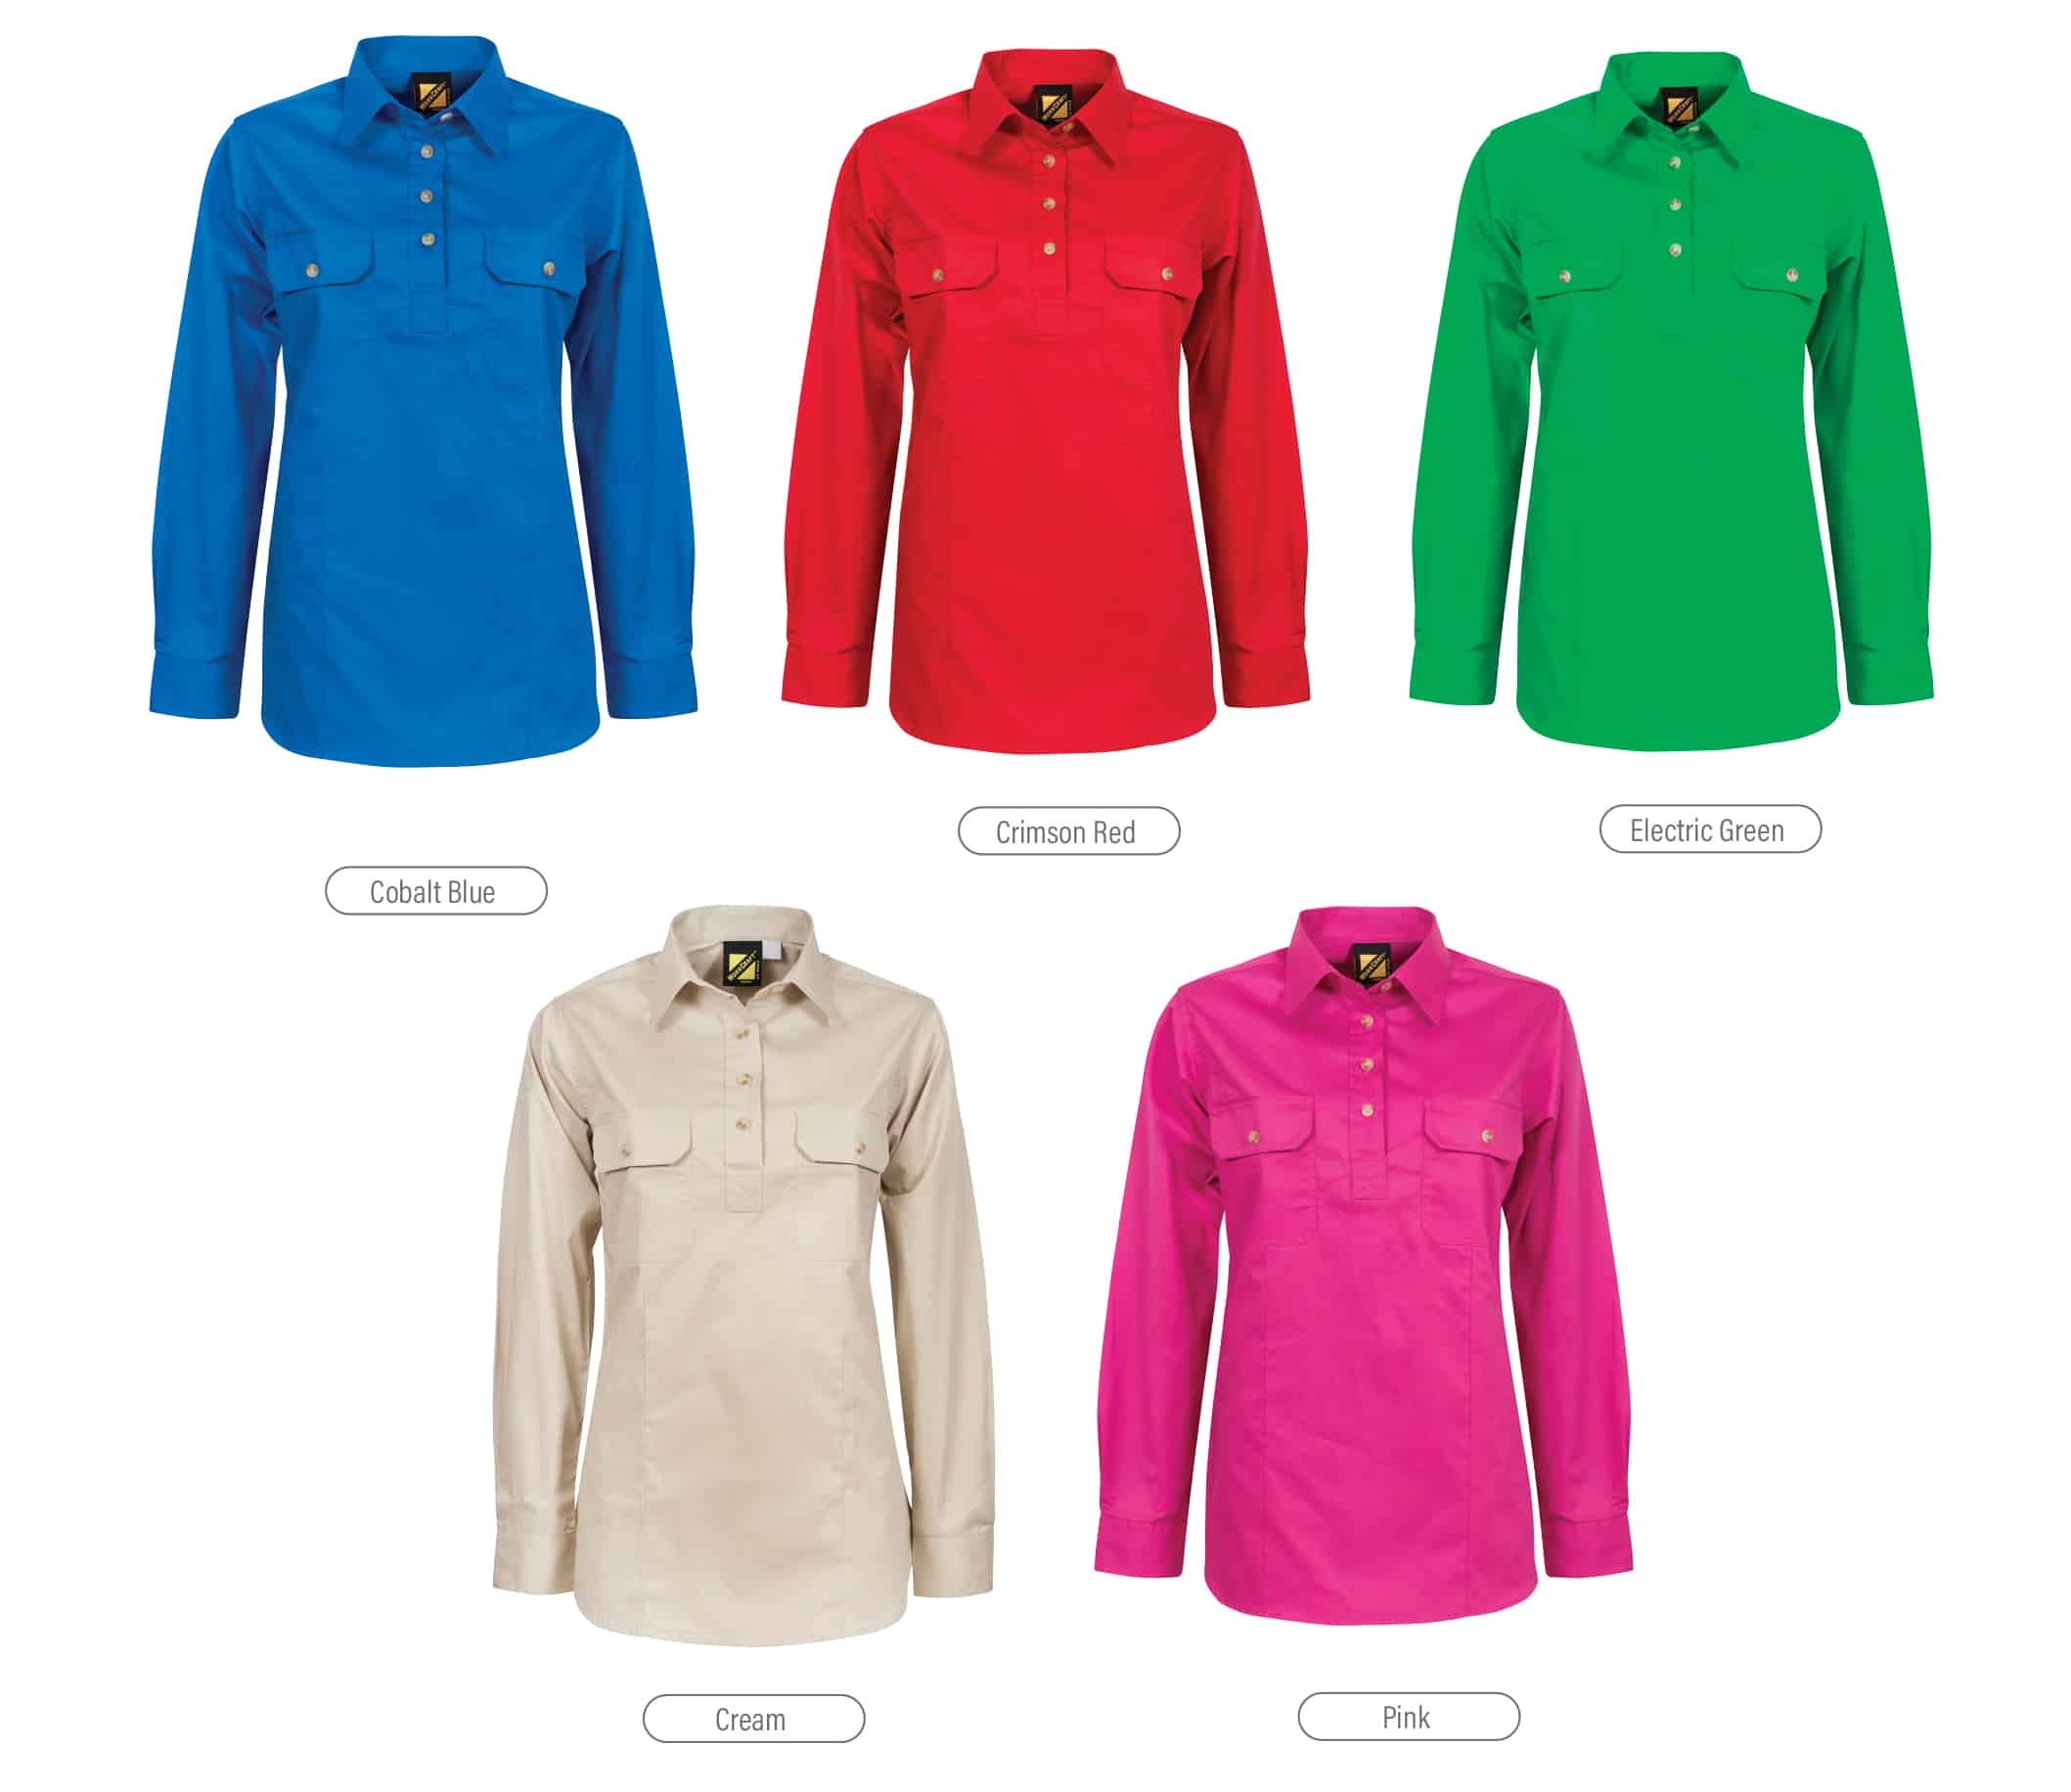 LADIES LIGHTWEIGHT LONG SLEEVE HALF PLACKET COTTON DRILL SHIRT WITH CONTRAST BUTTONS